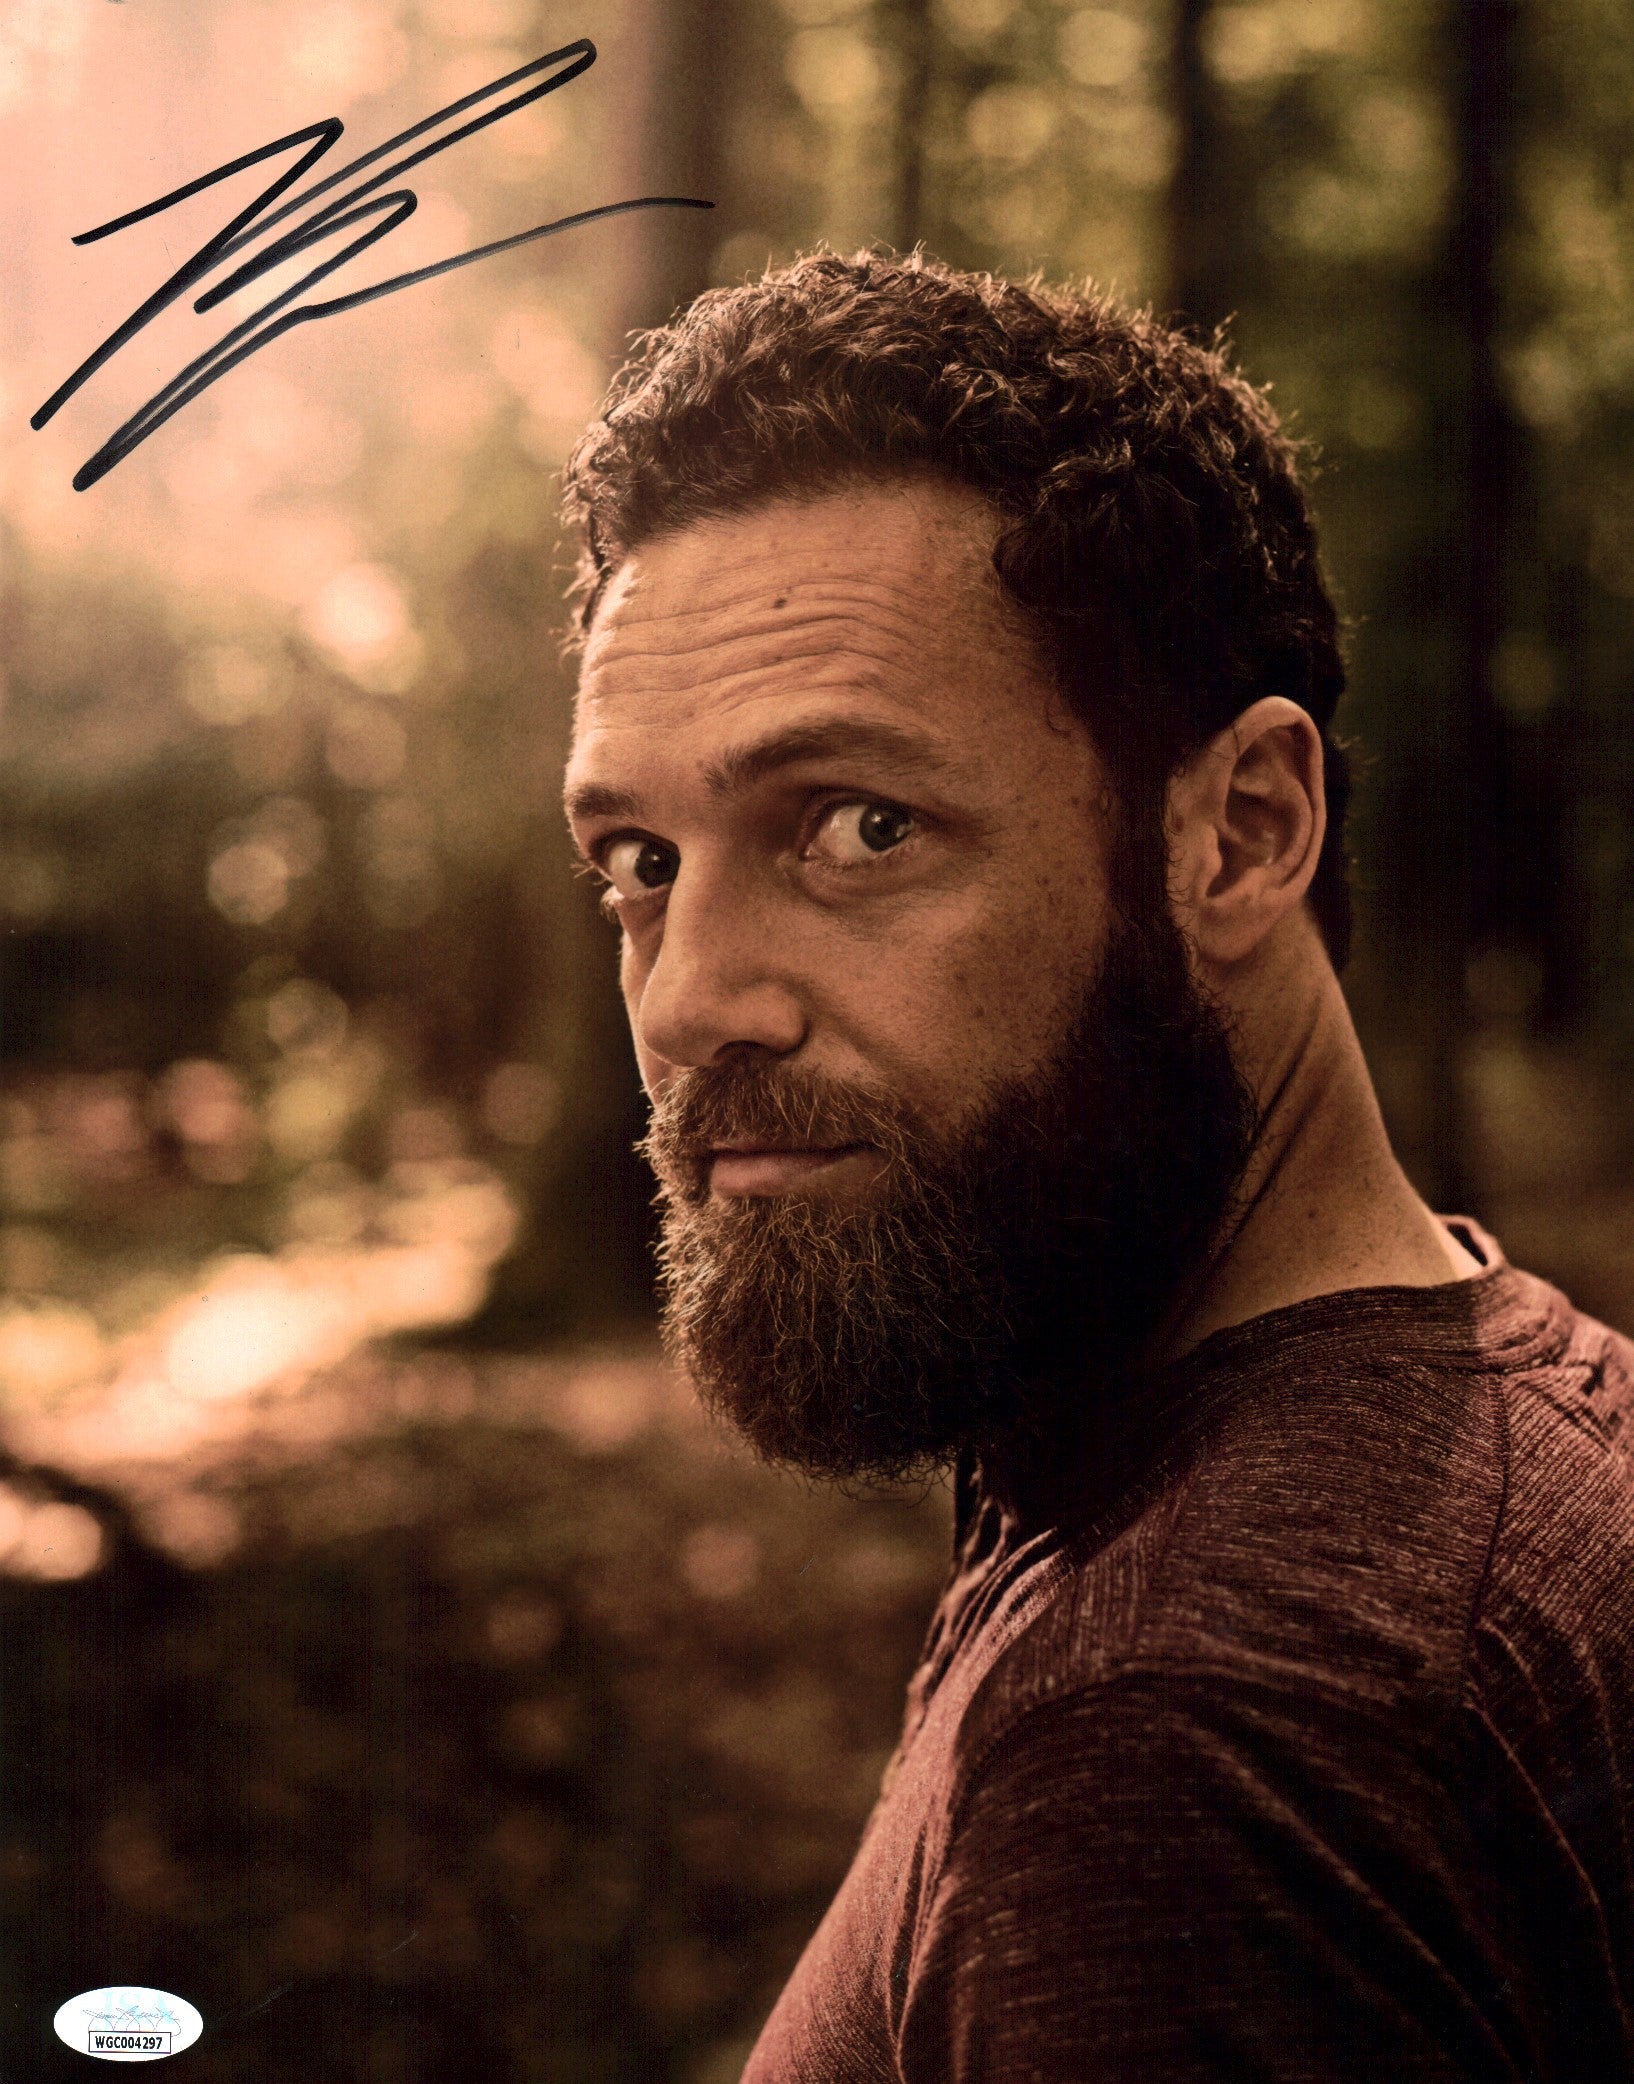 Ross Marquand The Walking Dead 11x14 Signed Photo JSA COA Certified Autograph GalaxyCon